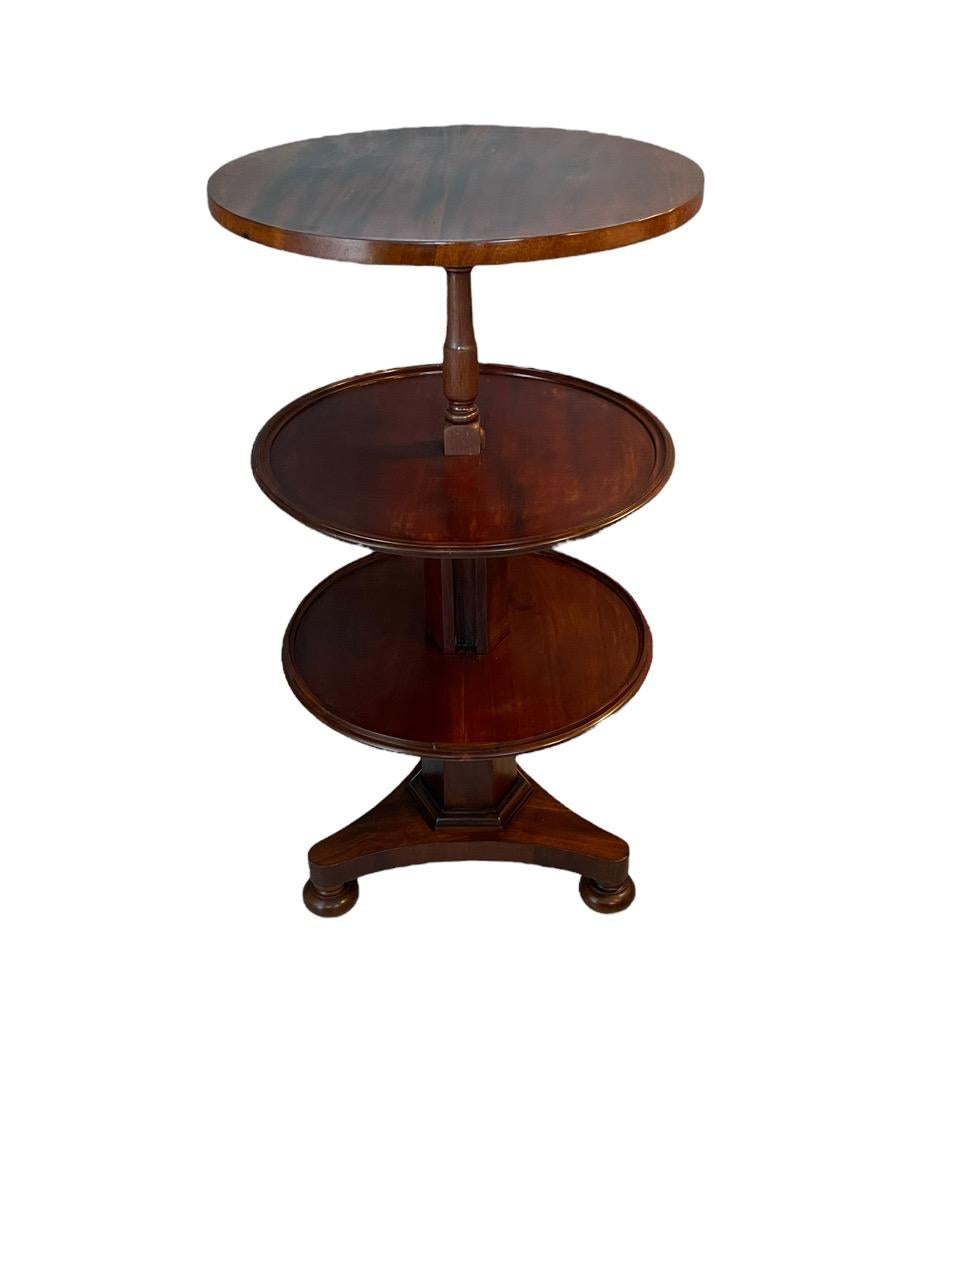 18th Century English Mahogany Expandable Round Three Tier Dumbwaiter Table For Sale 4